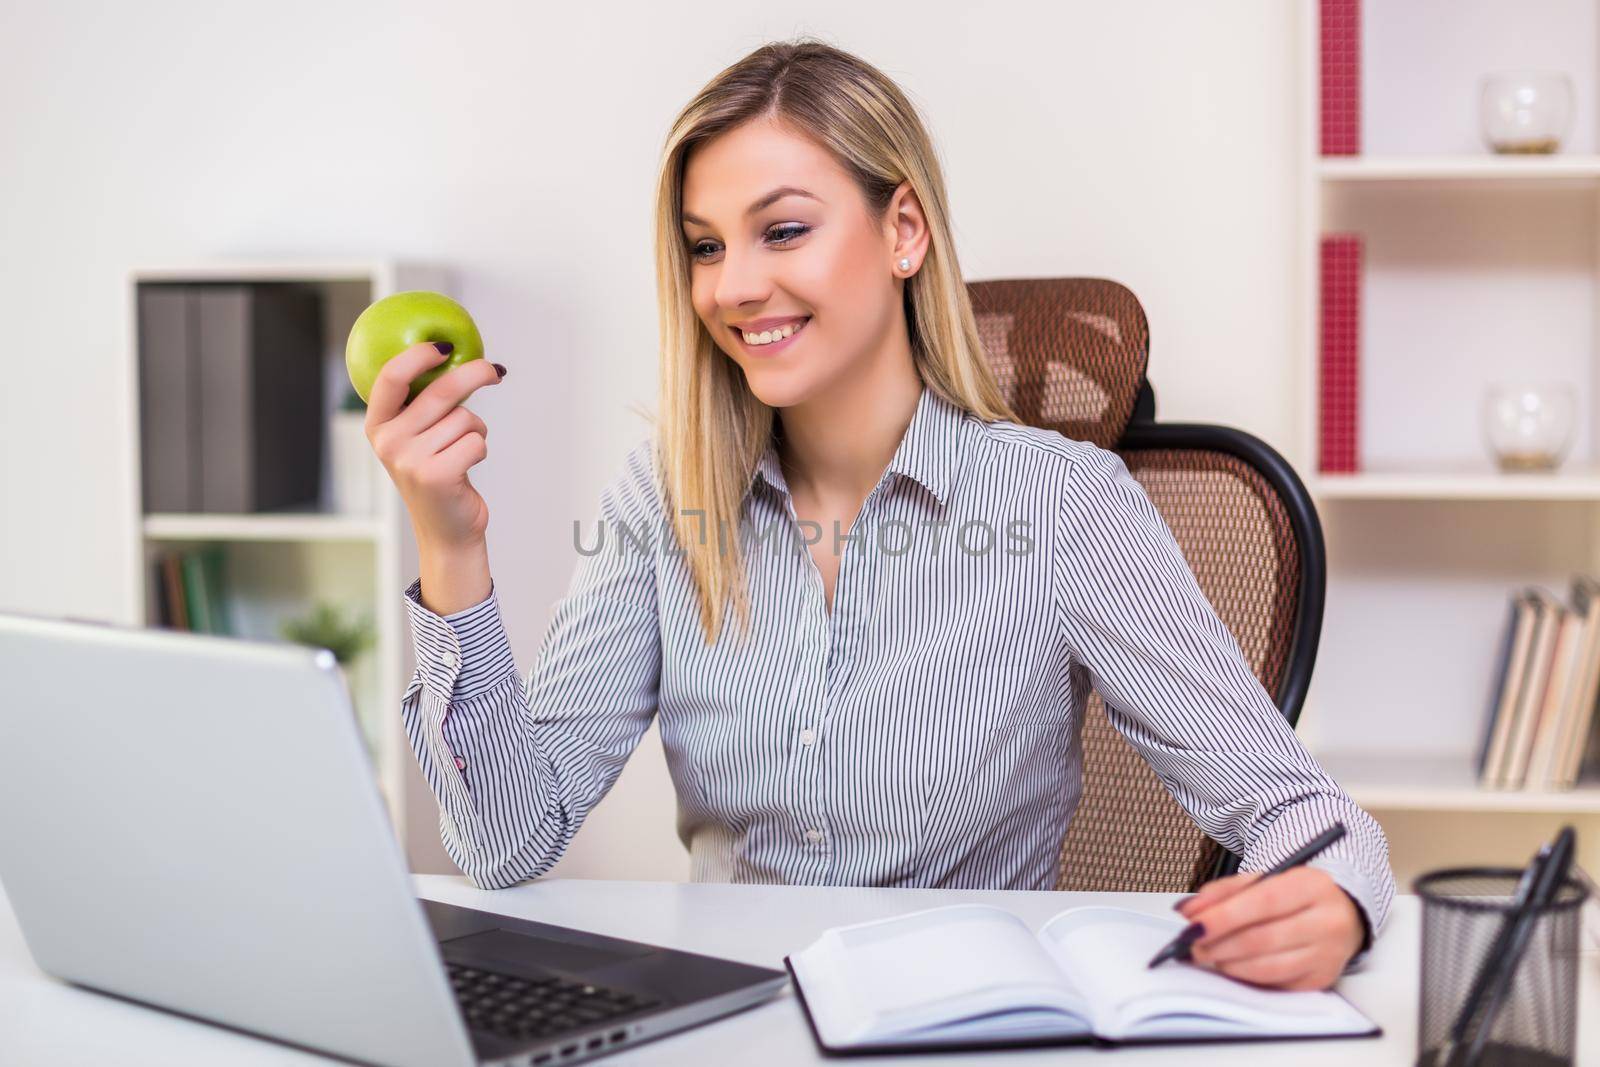 Businesswoman eating apple while working in her office.